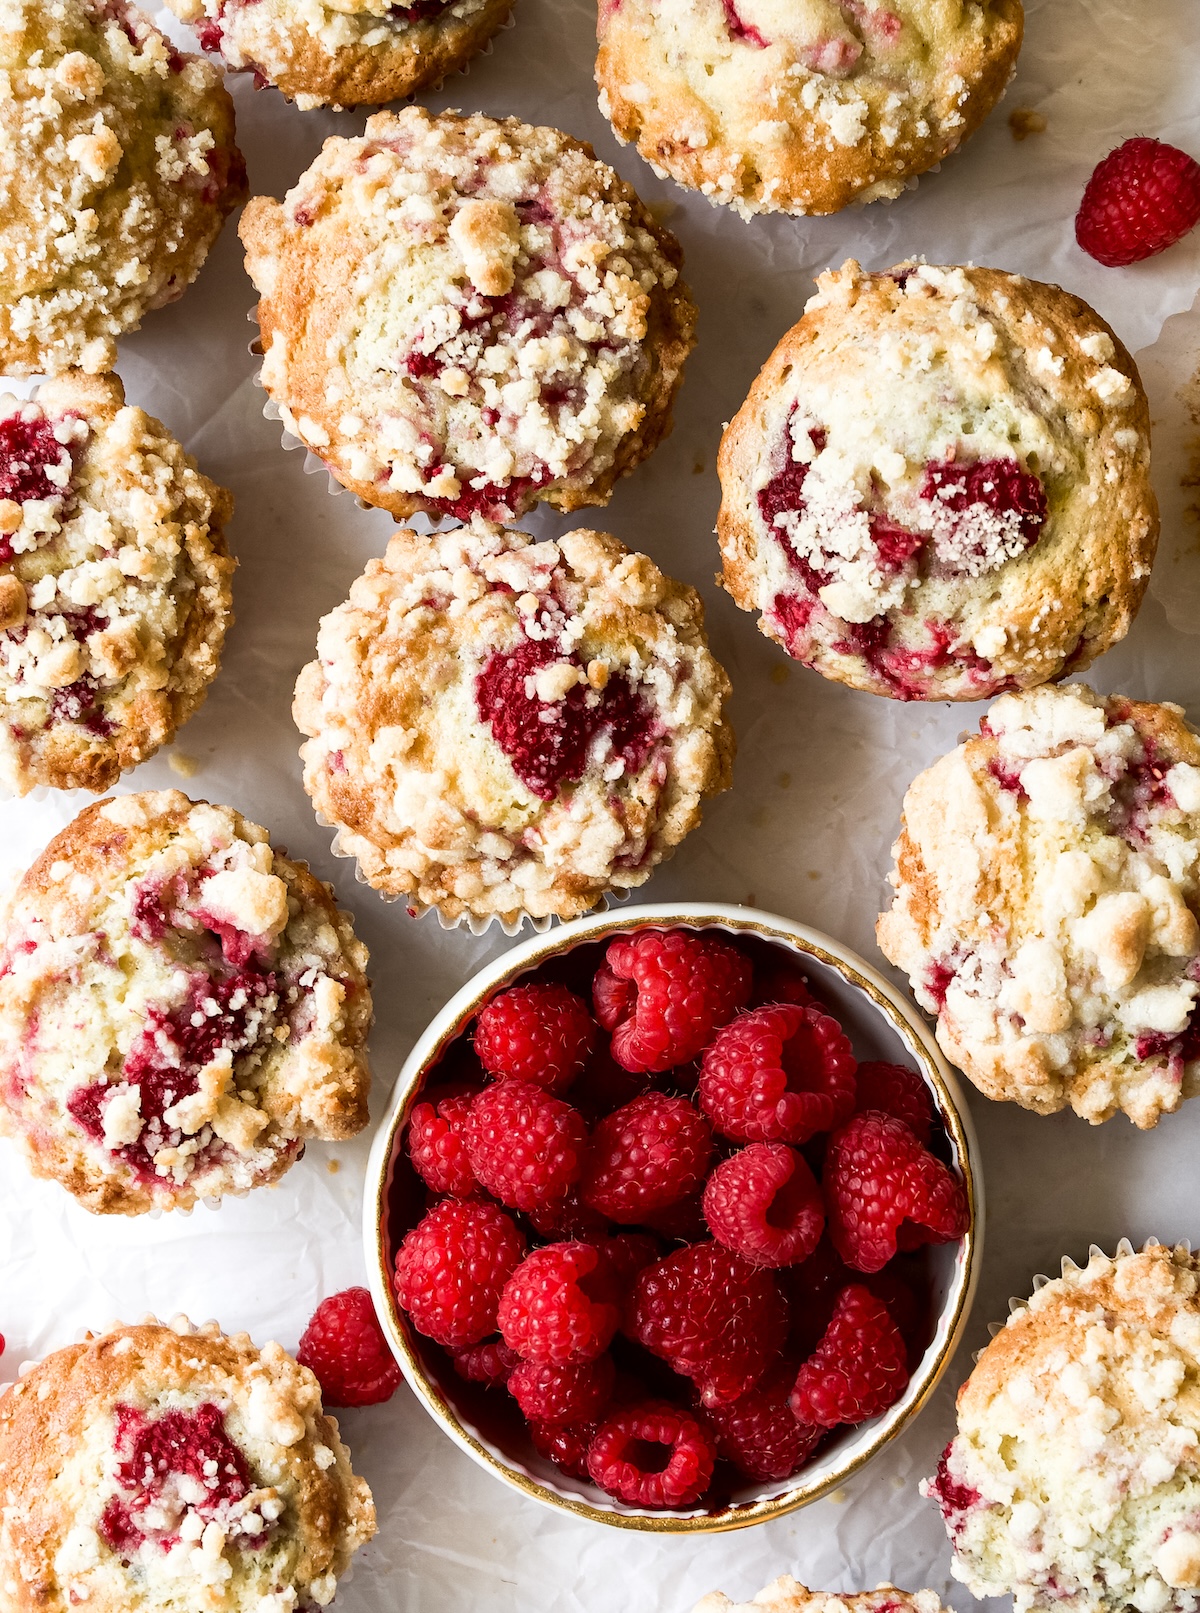 A bunch of Raspberry Muffins with streusel and a bowl of fresh aspberries.